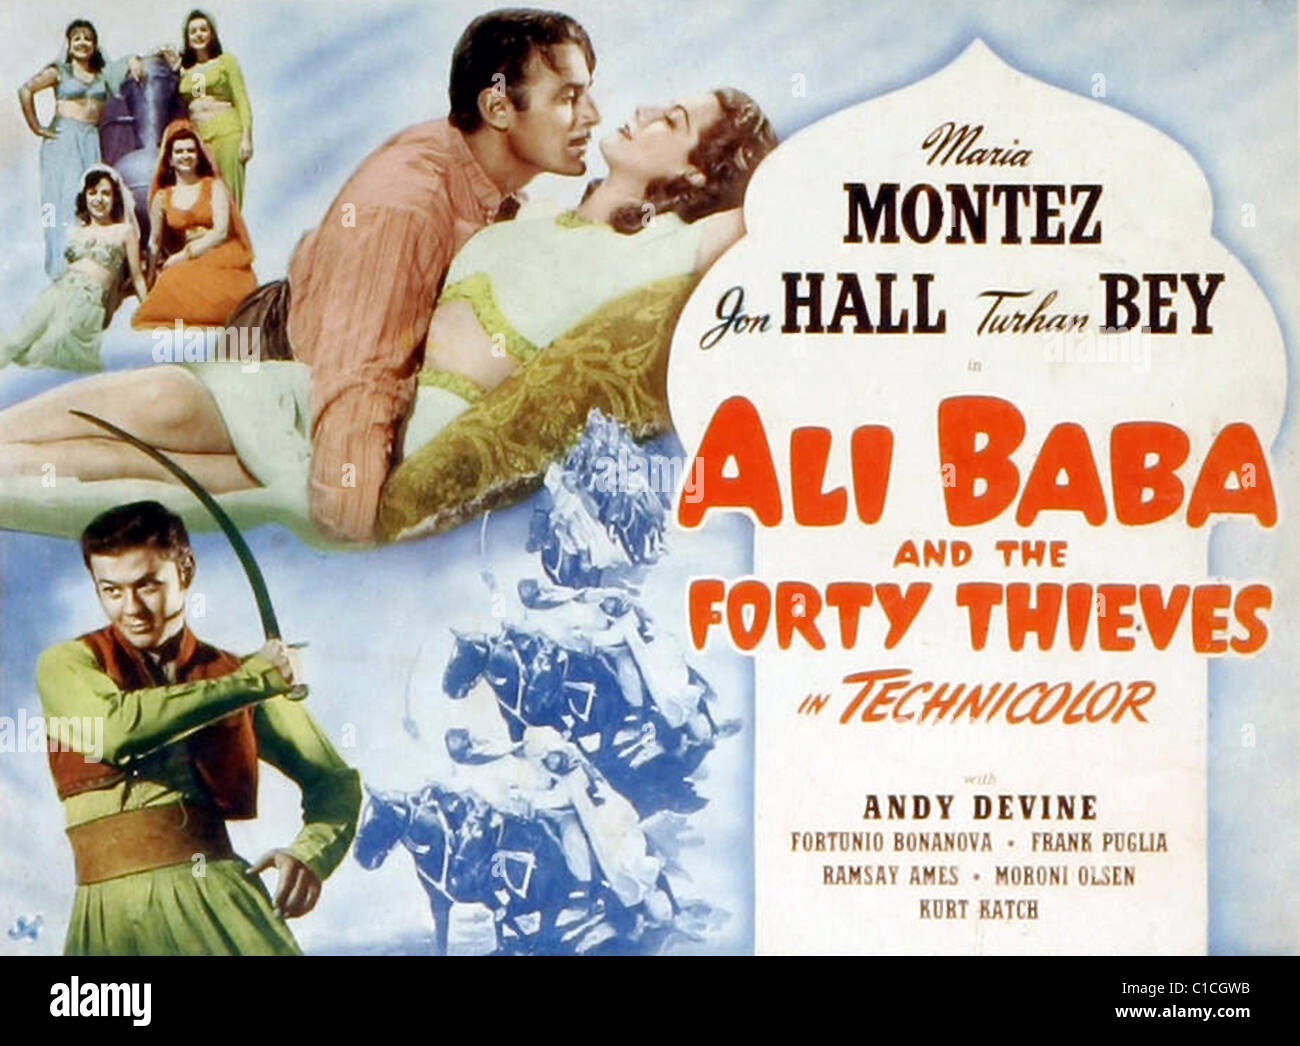 ALI BABA AND THE FORTY THIEVES (1944) ARTHUR LUBIN (DIR), MARIA MONTEZ, JON HALL POSTER 003 MOVIESTORE COLLECTION LTD Stock Photo